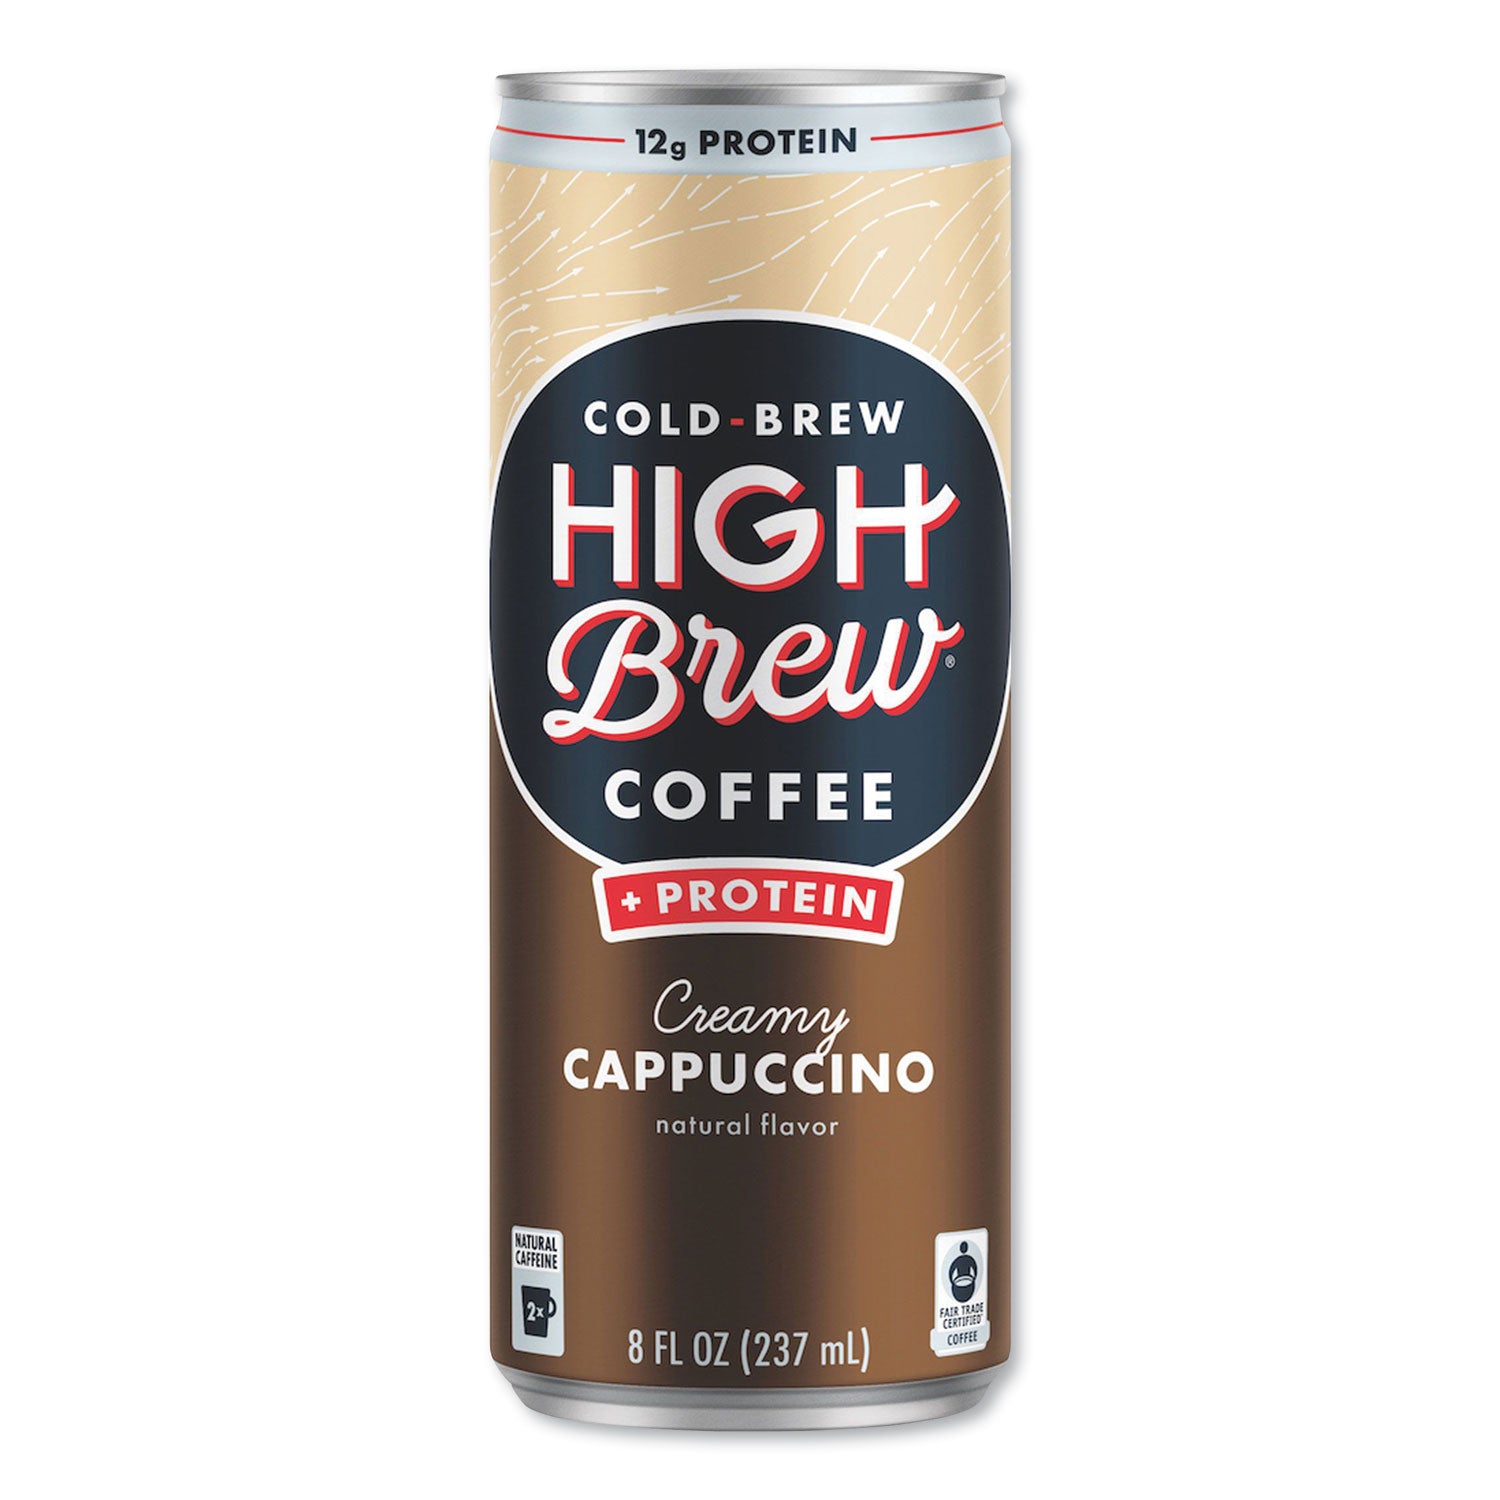 cold-brew-coffee-+-protein-creamy-cappuccino-8-oz-can-12-pack_hih00560 - 1